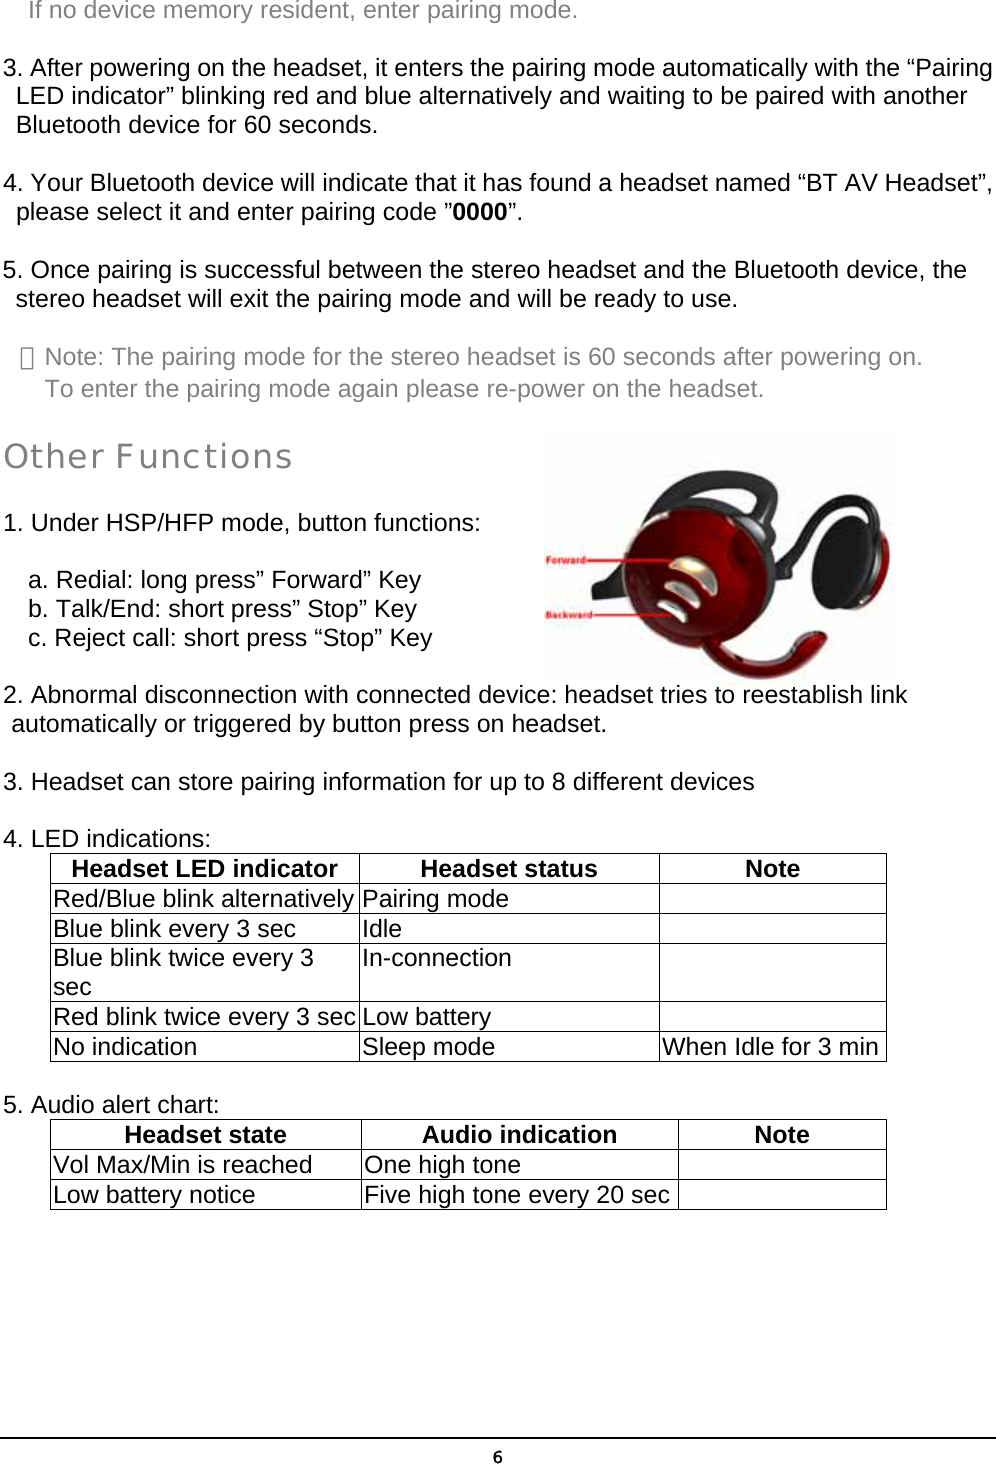   6    If no device memory resident, enter pairing mode.   3. After powering on the headset, it enters the pairing mode automatically with the “Pairing LED indicator” blinking red and blue alternatively and waiting to be paired with another Bluetooth device for 60 seconds. 4. Your Bluetooth device will indicate that it has found a headset named “BT AV Headset”, please select it and enter pairing code ”0000”. 5. Once pairing is successful between the stereo headset and the Bluetooth device, the stereo headset will exit the pairing mode and will be ready to use. ＊Note: The pairing mode for the stereo headset is 60 seconds after powering on. To enter the pairing mode again please re-power on the headset. Other Functions  1. Under HSP/HFP mode, button functions:      a. Redial: long press” Forward” Key     b. Talk/End: short press” Stop” Key       c. Reject call: short press “Stop” Key  2. Abnormal disconnection with connected device: headset tries to reestablish link automatically or triggered by button press on headset.  3. Headset can store pairing information for up to 8 different devices  4. LED indications: Headset LED indicator  Headset status  Note Red/Blue blink alternatively Pairing mode   Blue blink every 3 sec  Idle   Blue blink twice every 3 sec  In-connection  Red blink twice every 3 sec Low battery   No indication  Sleep mode    When Idle for 3 min  5. Audio alert chart: Headset state  Audio indication  Note Vol Max/Min is reached  One high tone   Low battery notice  Five high tone every 20 sec    